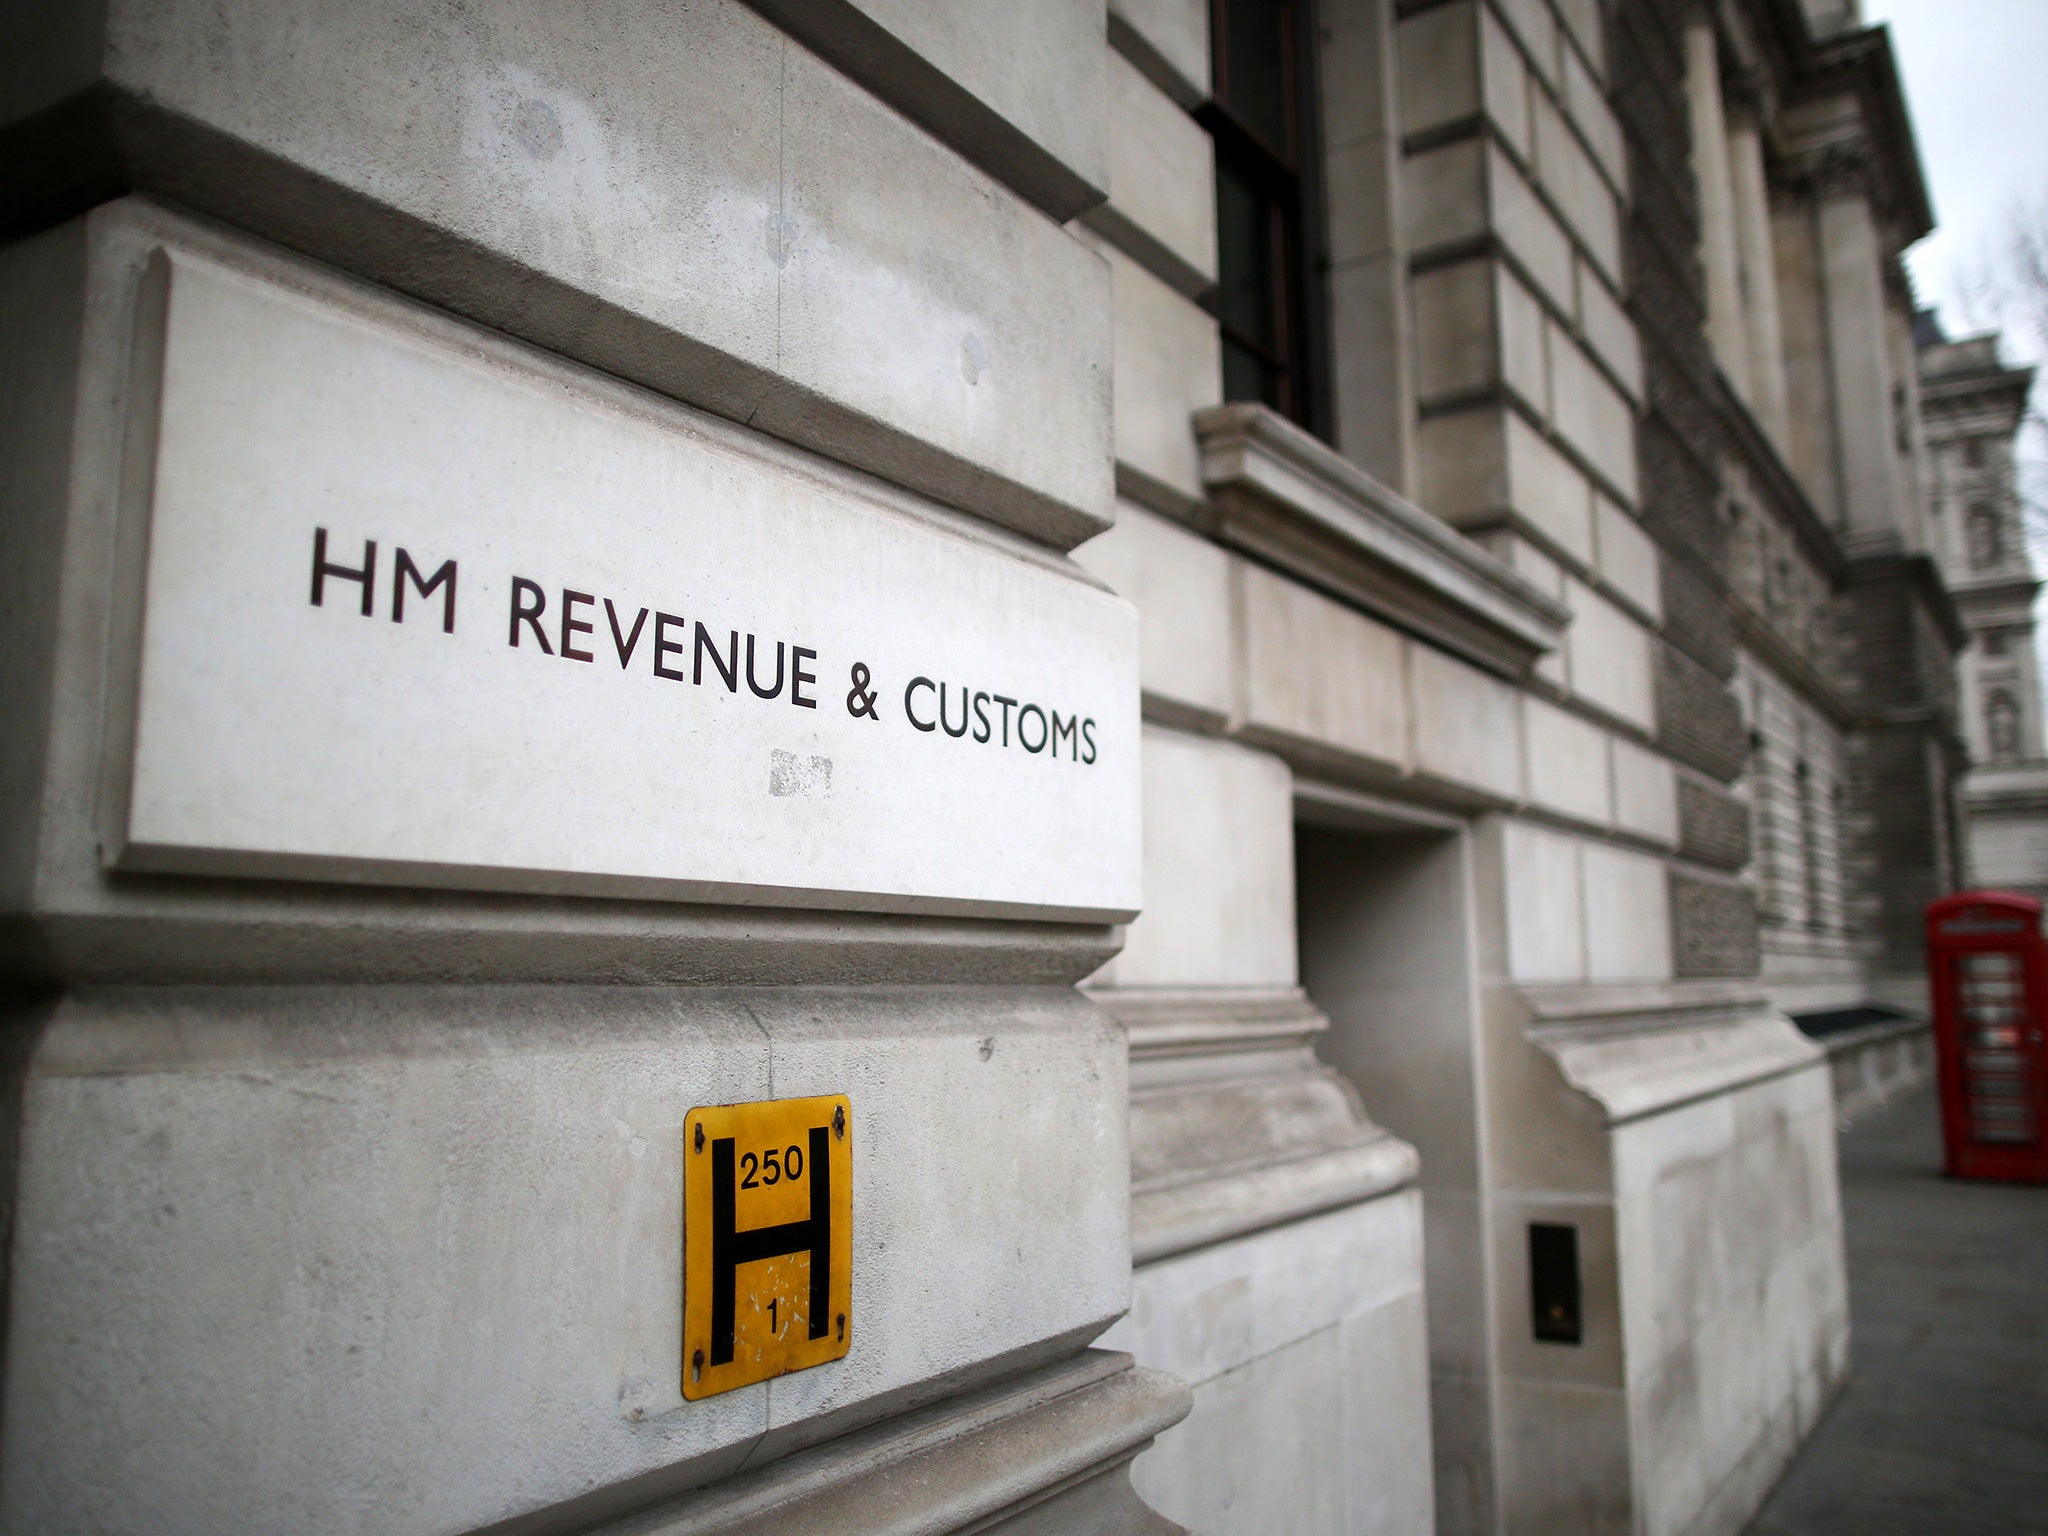 HMRC is issuing a consultation document this week